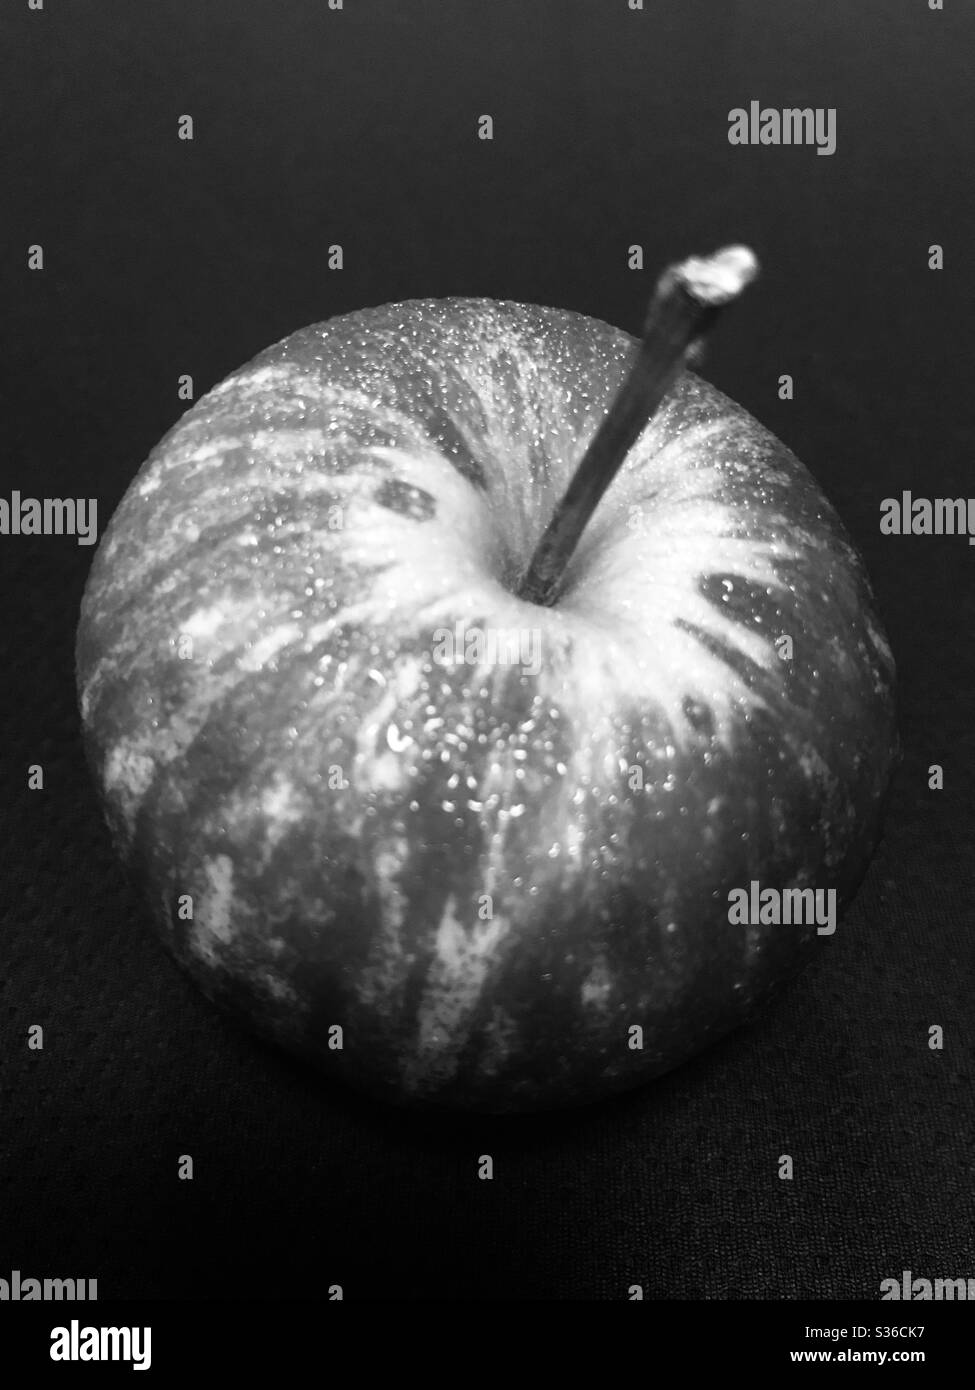 Dramatic black & white look of a red Apple with water droplets after kept out from refrigerator before consumption “An Apple a day keeps the doctor away” Stock Photo